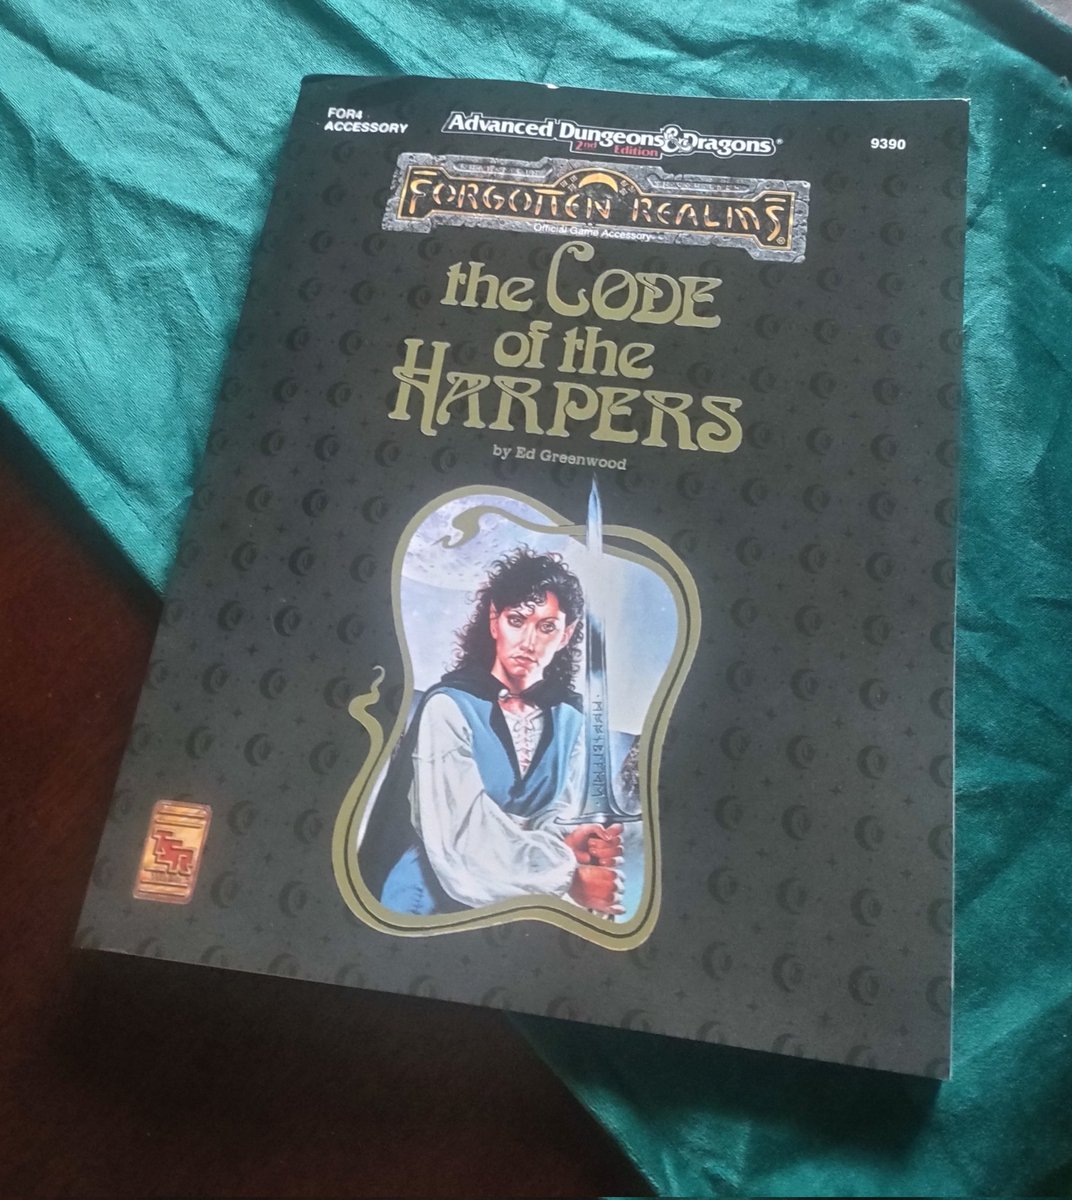 I picked up 'The Code of the Harpers' by Ed Greenwood as a POD for my D&D 5e campaign. It's a great little book and is filled with plenty of ideas and hooks I can put to good use. I'm introducing a Harper patron into the game on Sunday - let's see how the players react!